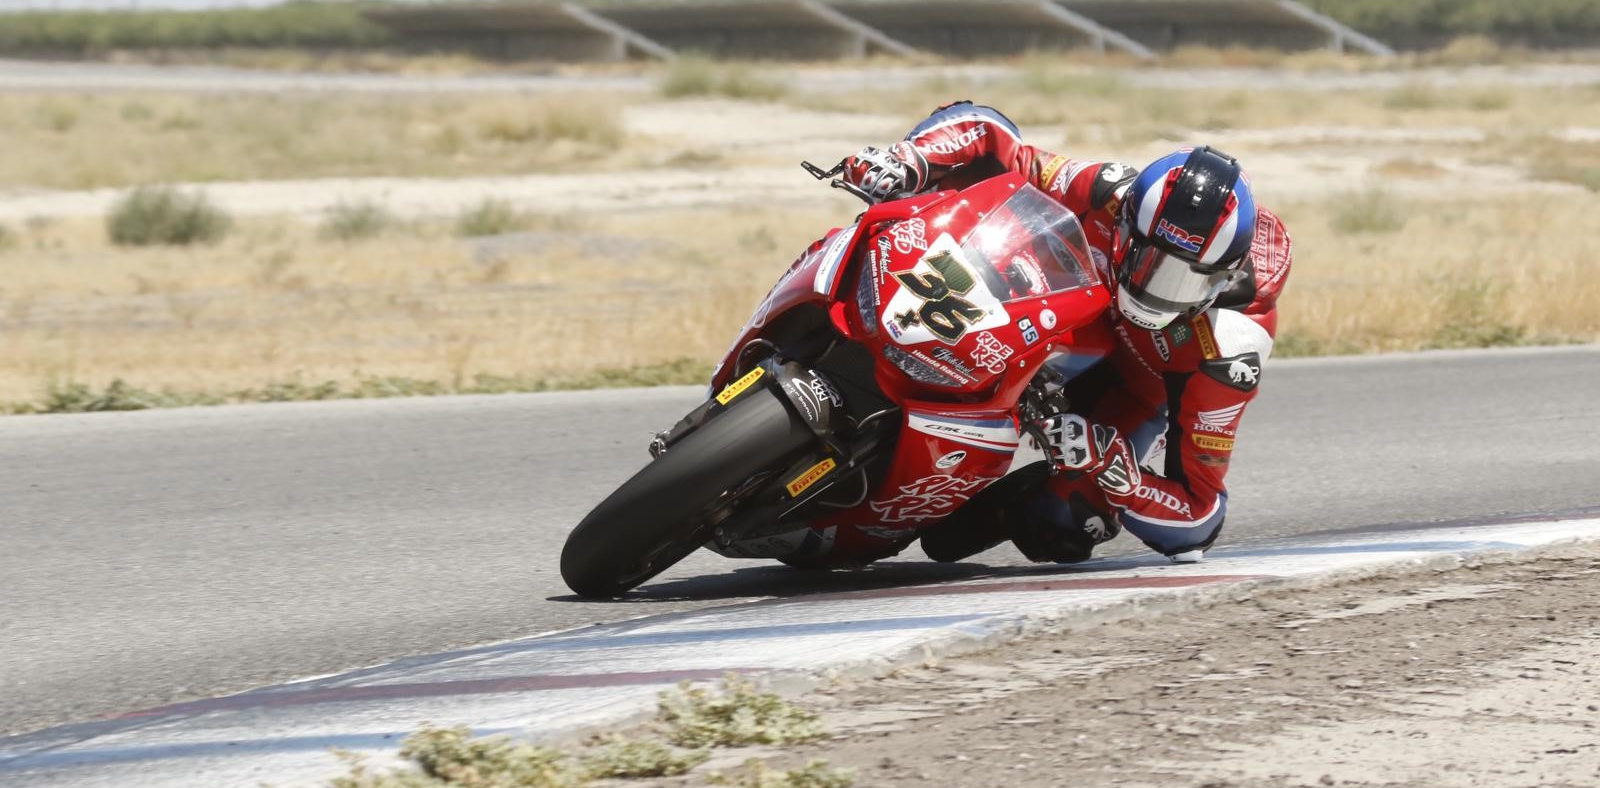 Jayson Uribe (36X) won three AFM races on his Honda CBR1000RR at Buttonwillow Raceway Park. Photo by Max Klein/Oxymoron Photography, courtesy of Jayson Uribe Racing.